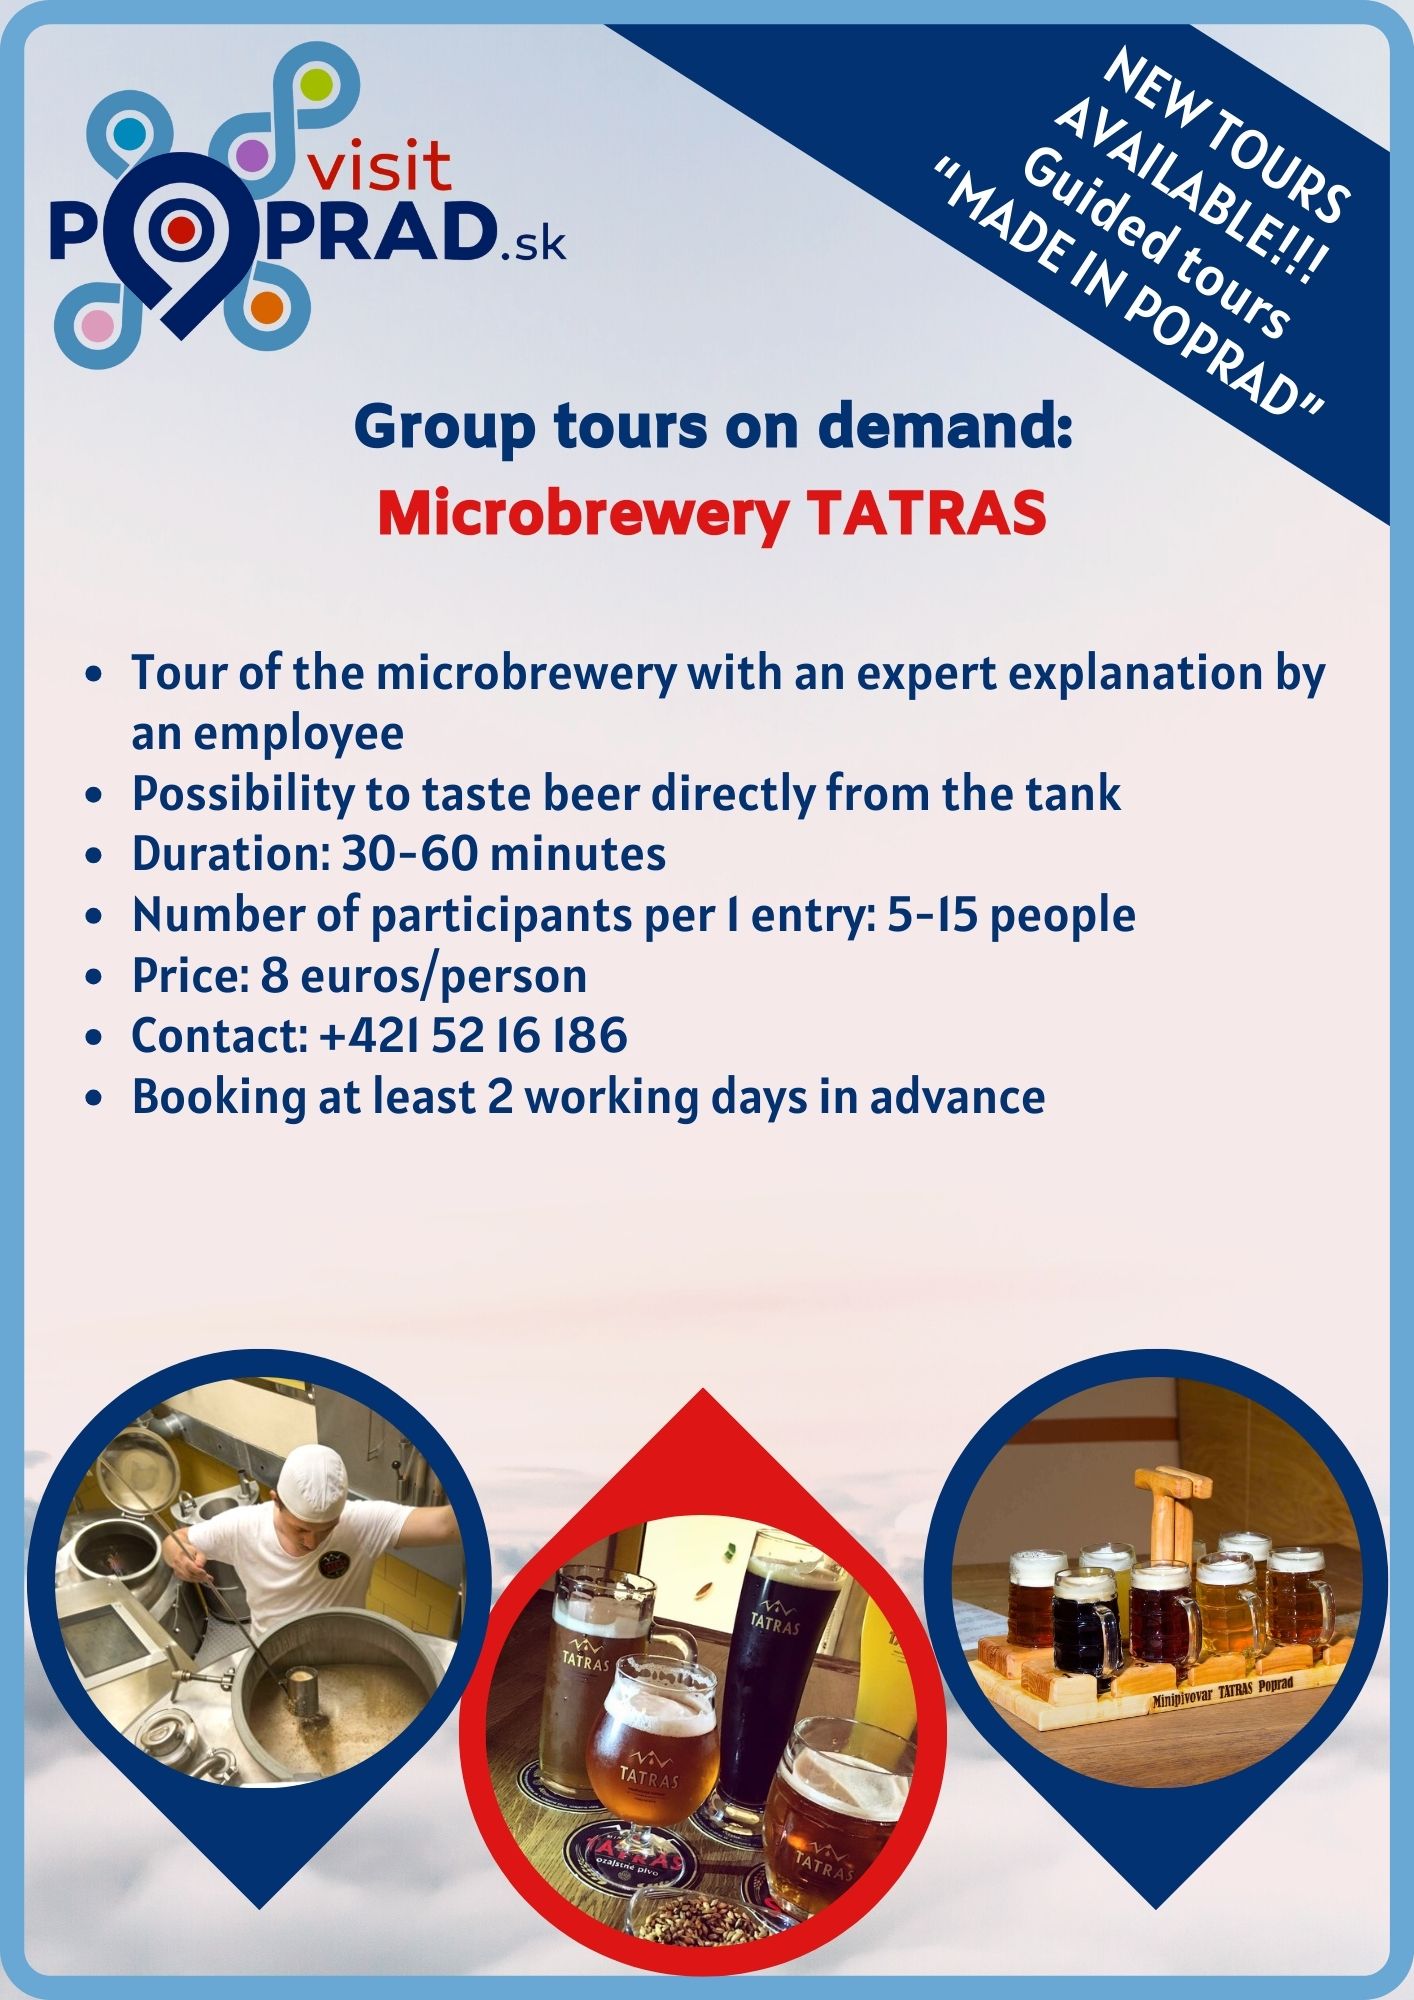 MADE IN POPRAD - Minibrewery TATRAS (Duration: 30 minutes), Price: 8 €